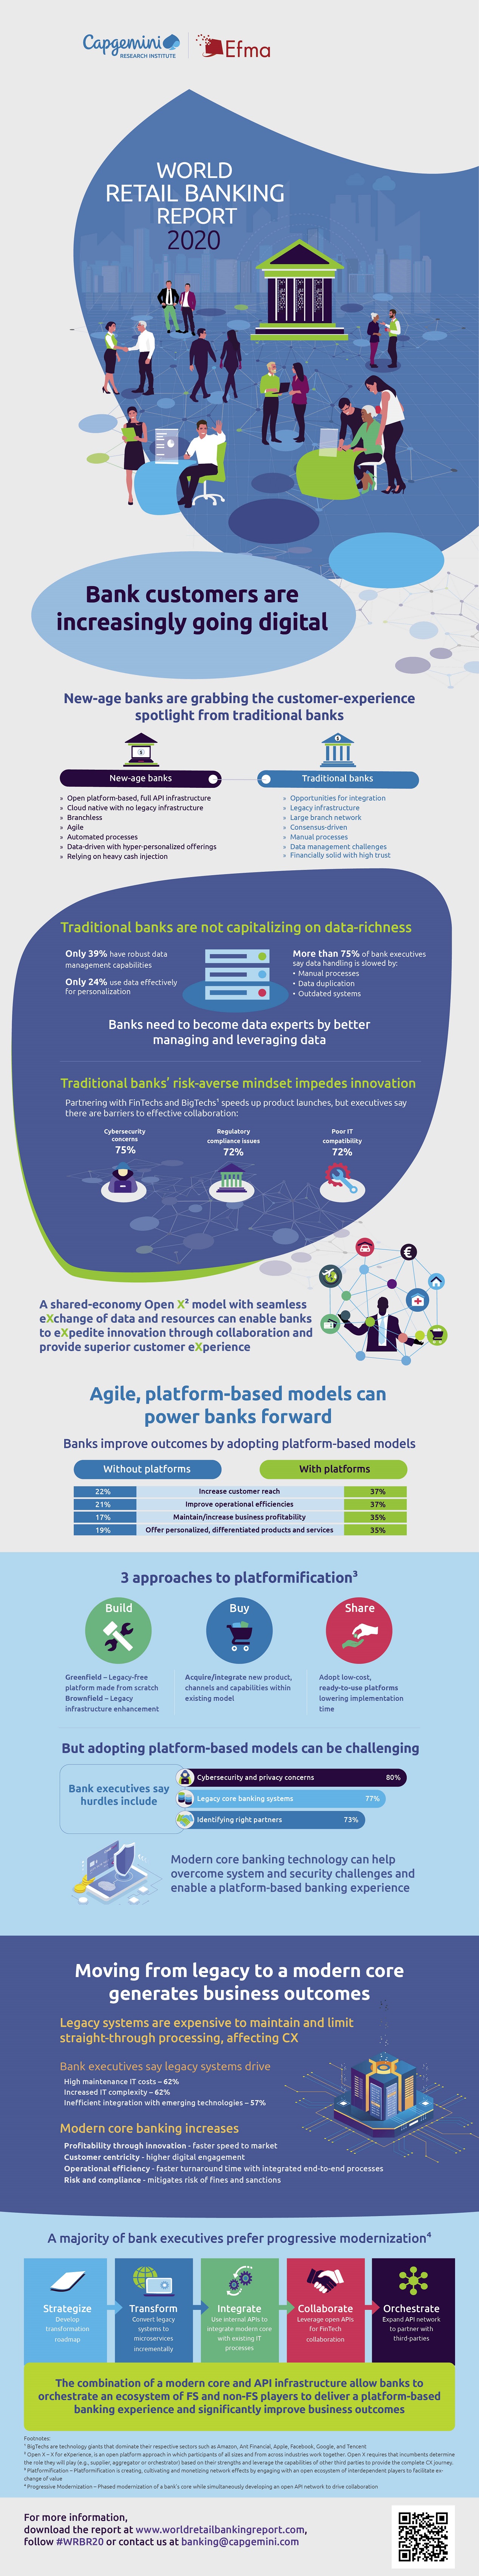 World Retail Banking Report 2020 #infographic